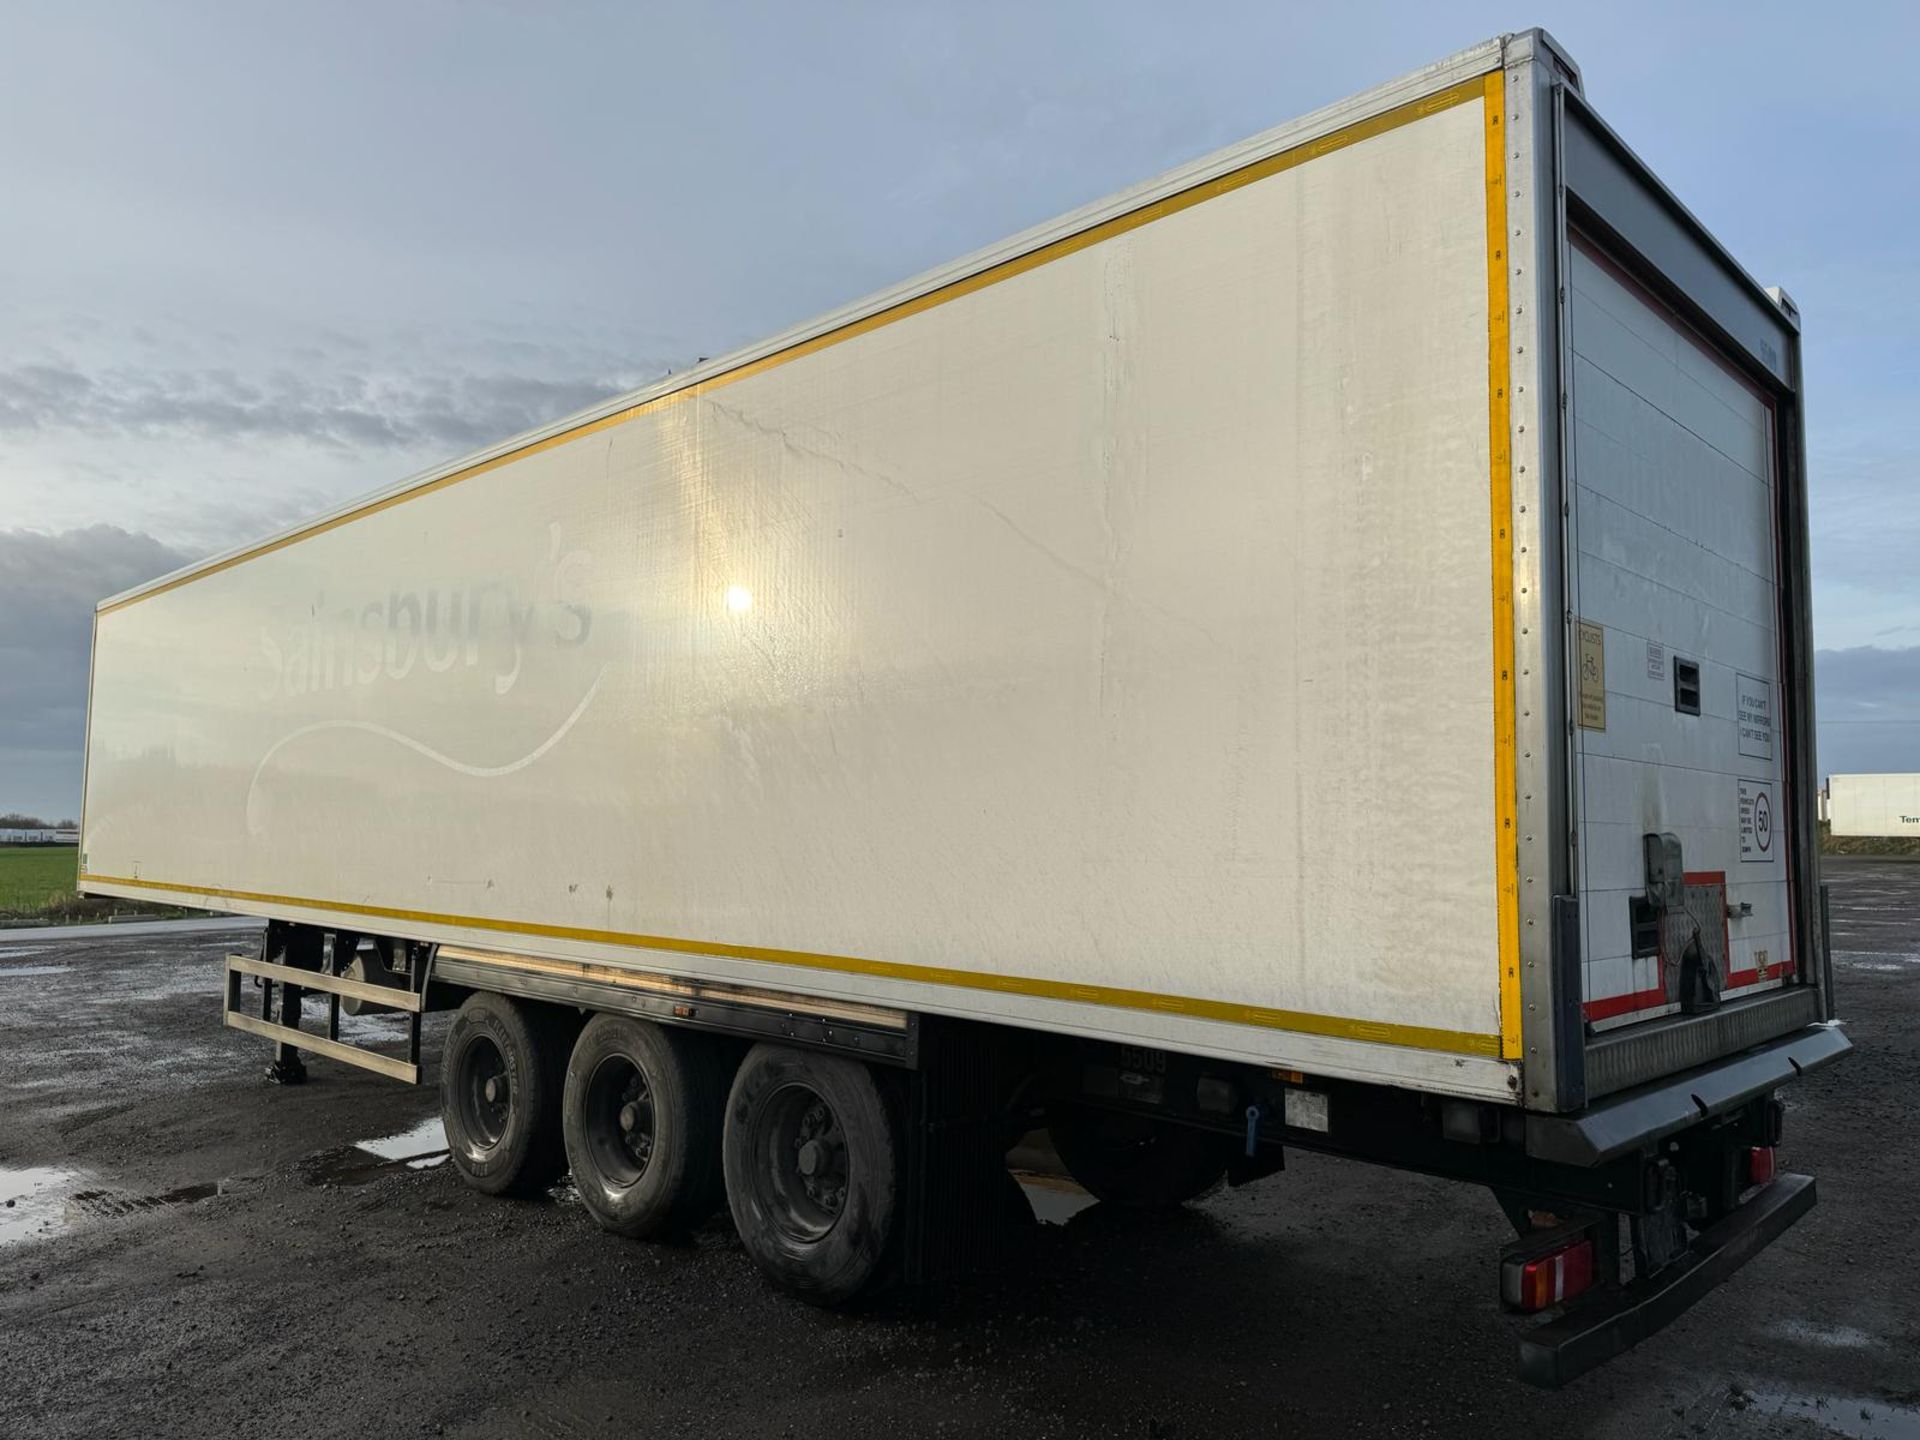 5509 – 2014 Montracon 13.6m Refrigerated Trailer - Image 3 of 11